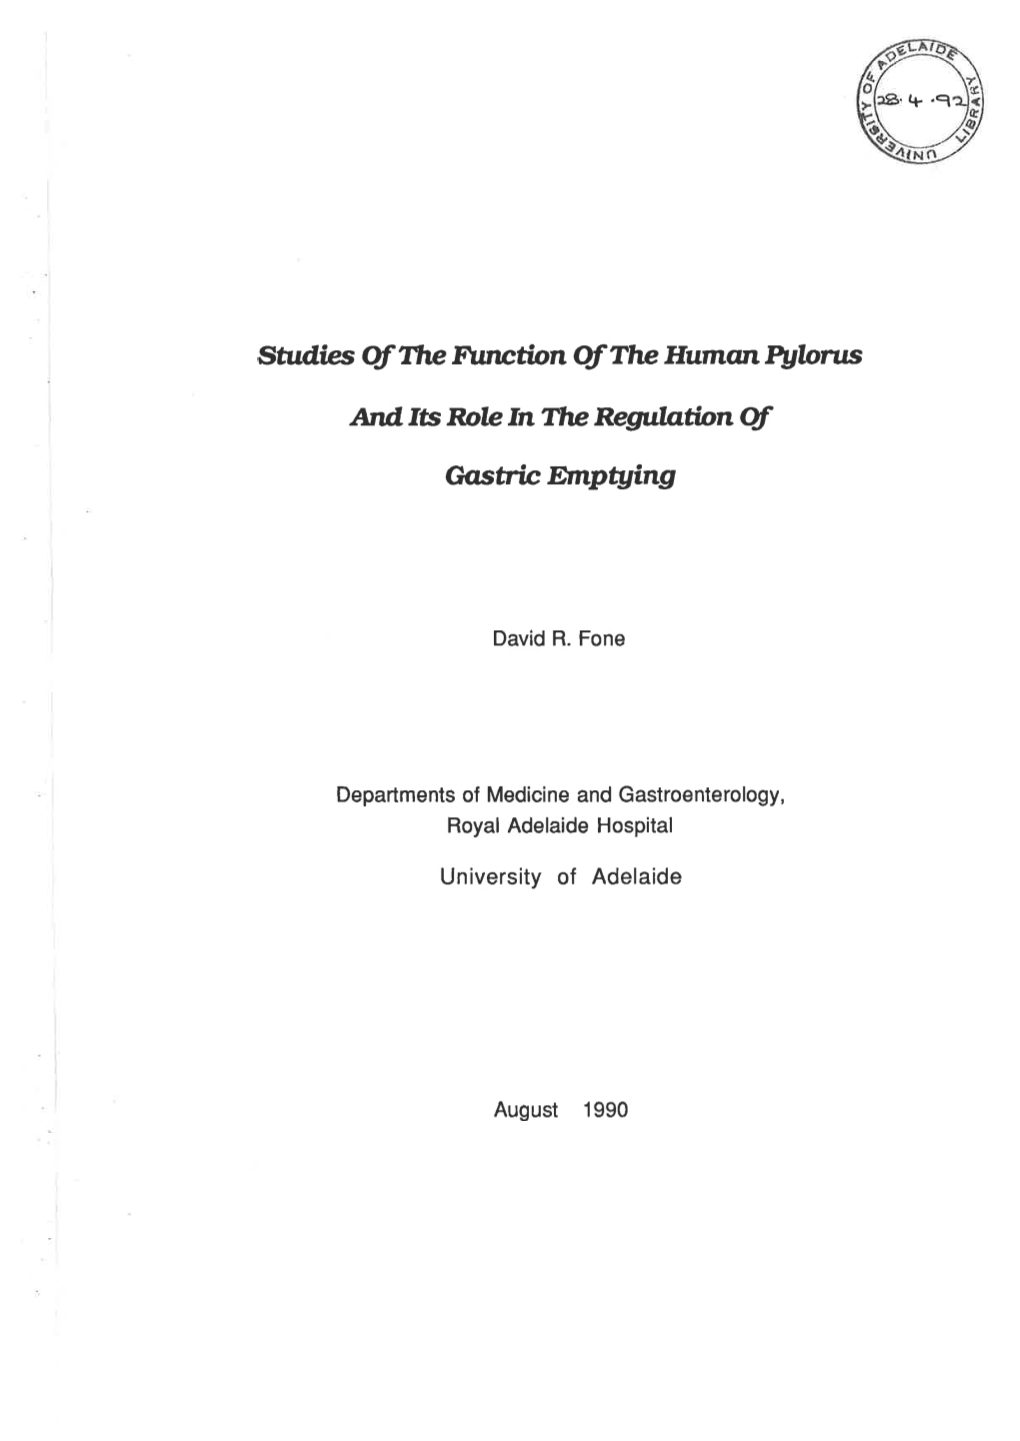 Studies of the Function of the Human Pylorus : and Its Role in The